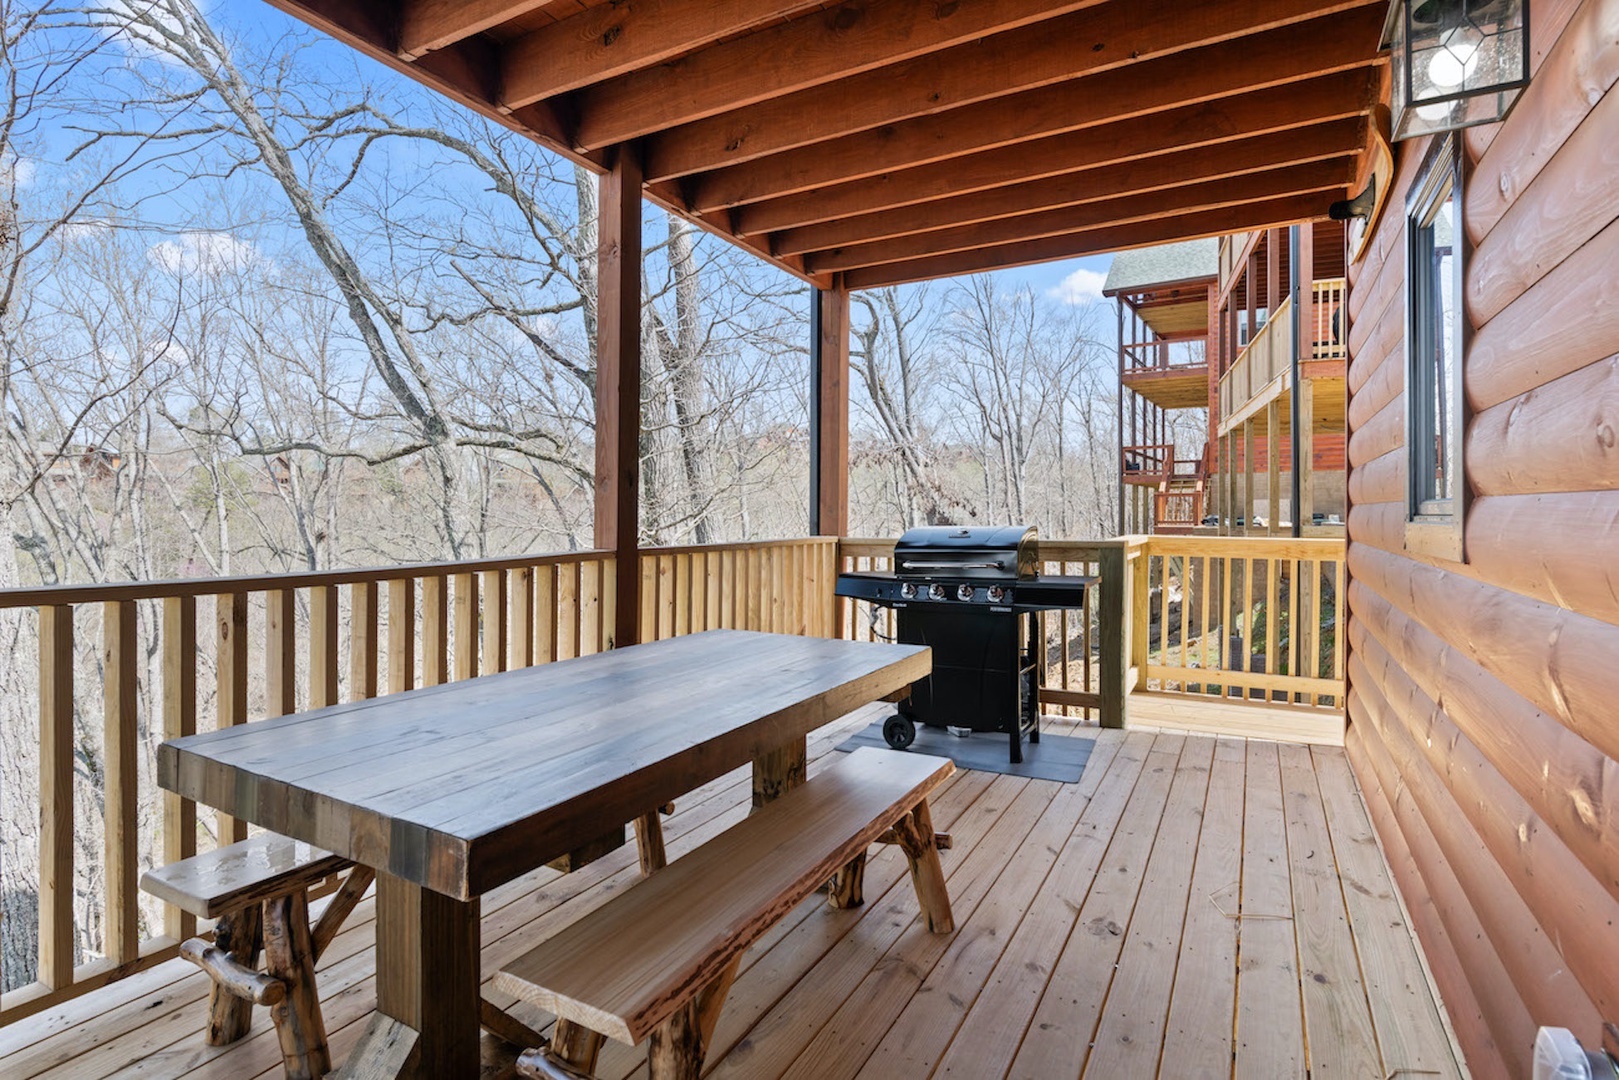 Enjoy meals together or relax while you grill up a feast on the back deck!